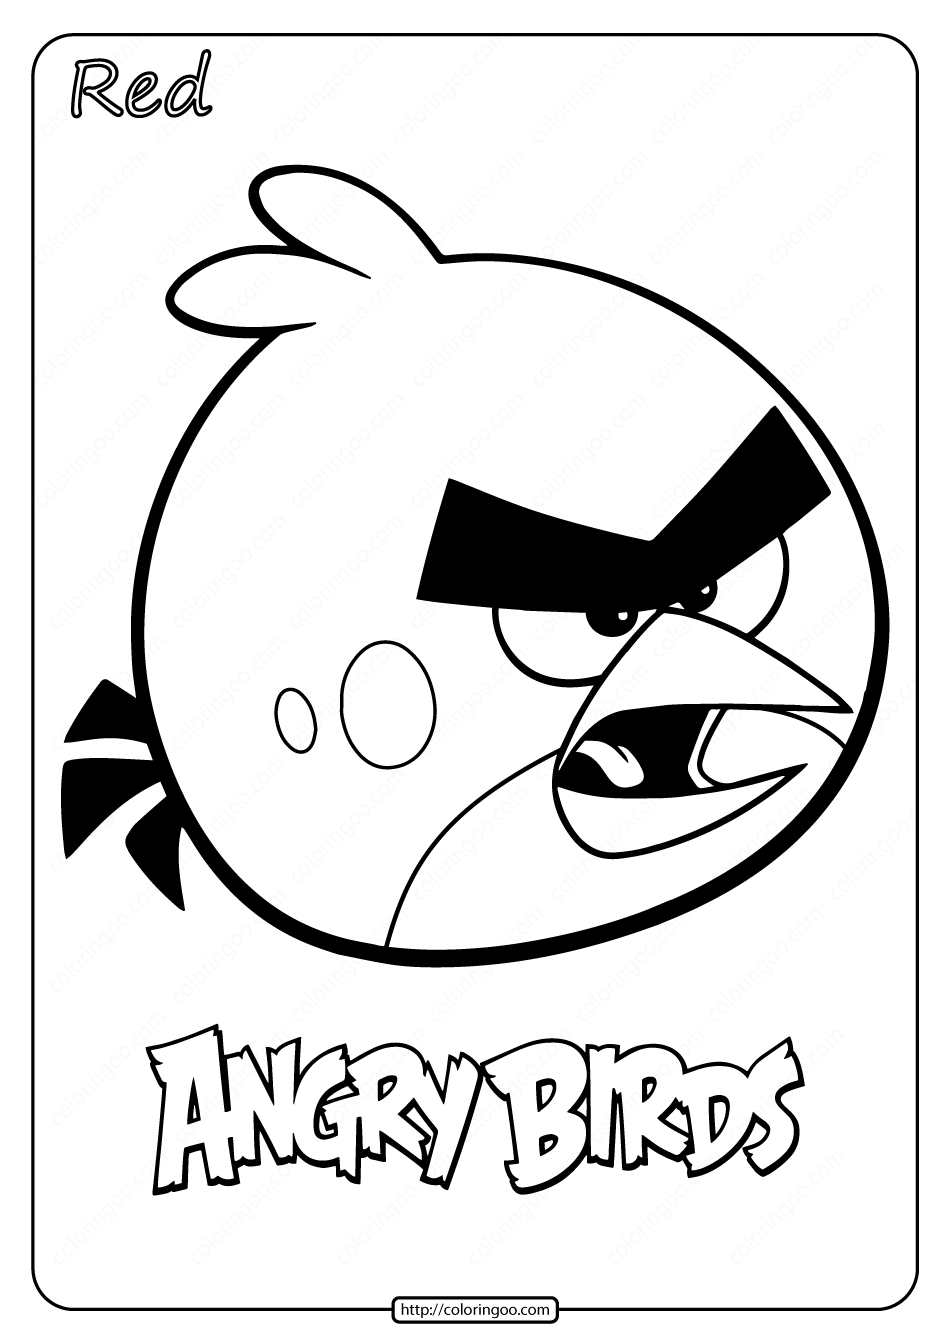 Printable Angry Birds Red Coloring Book